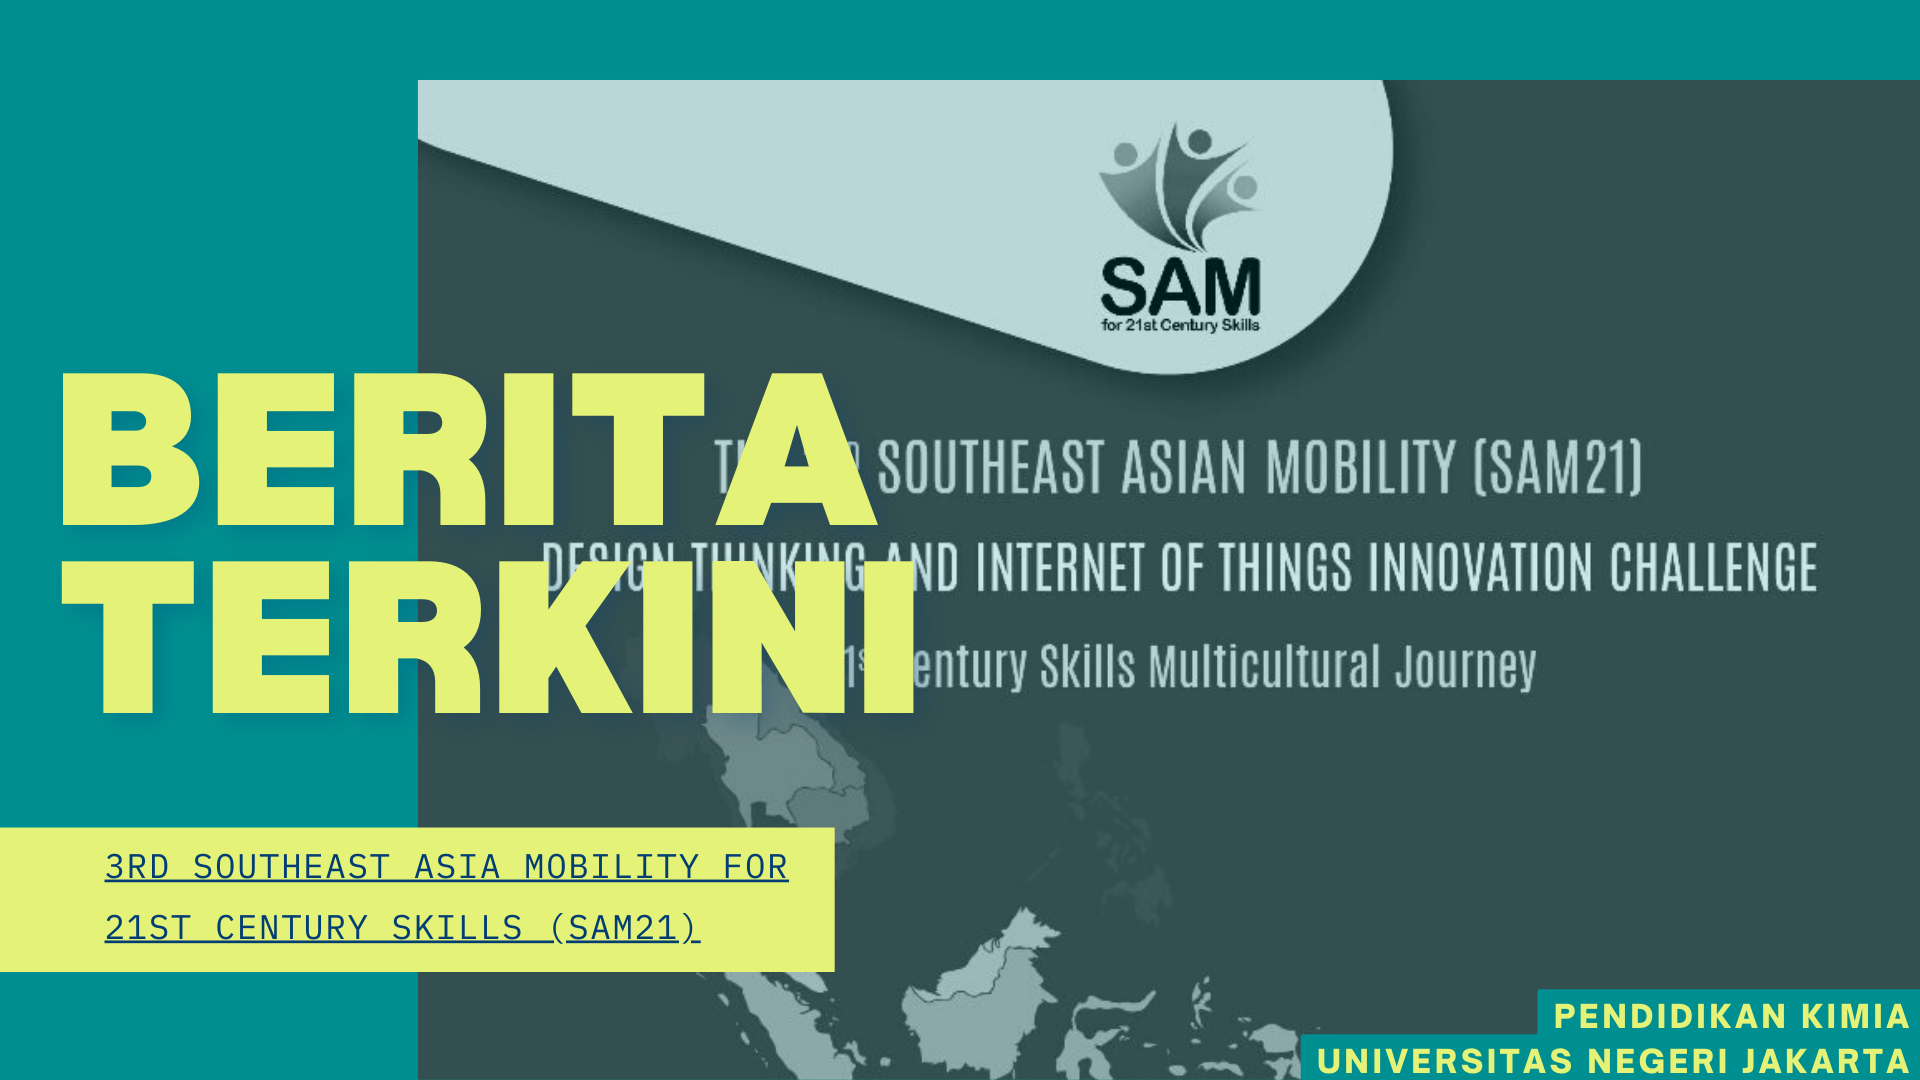 3rd Southeast Asia Mobility for 21st Century Skills (SAM21)